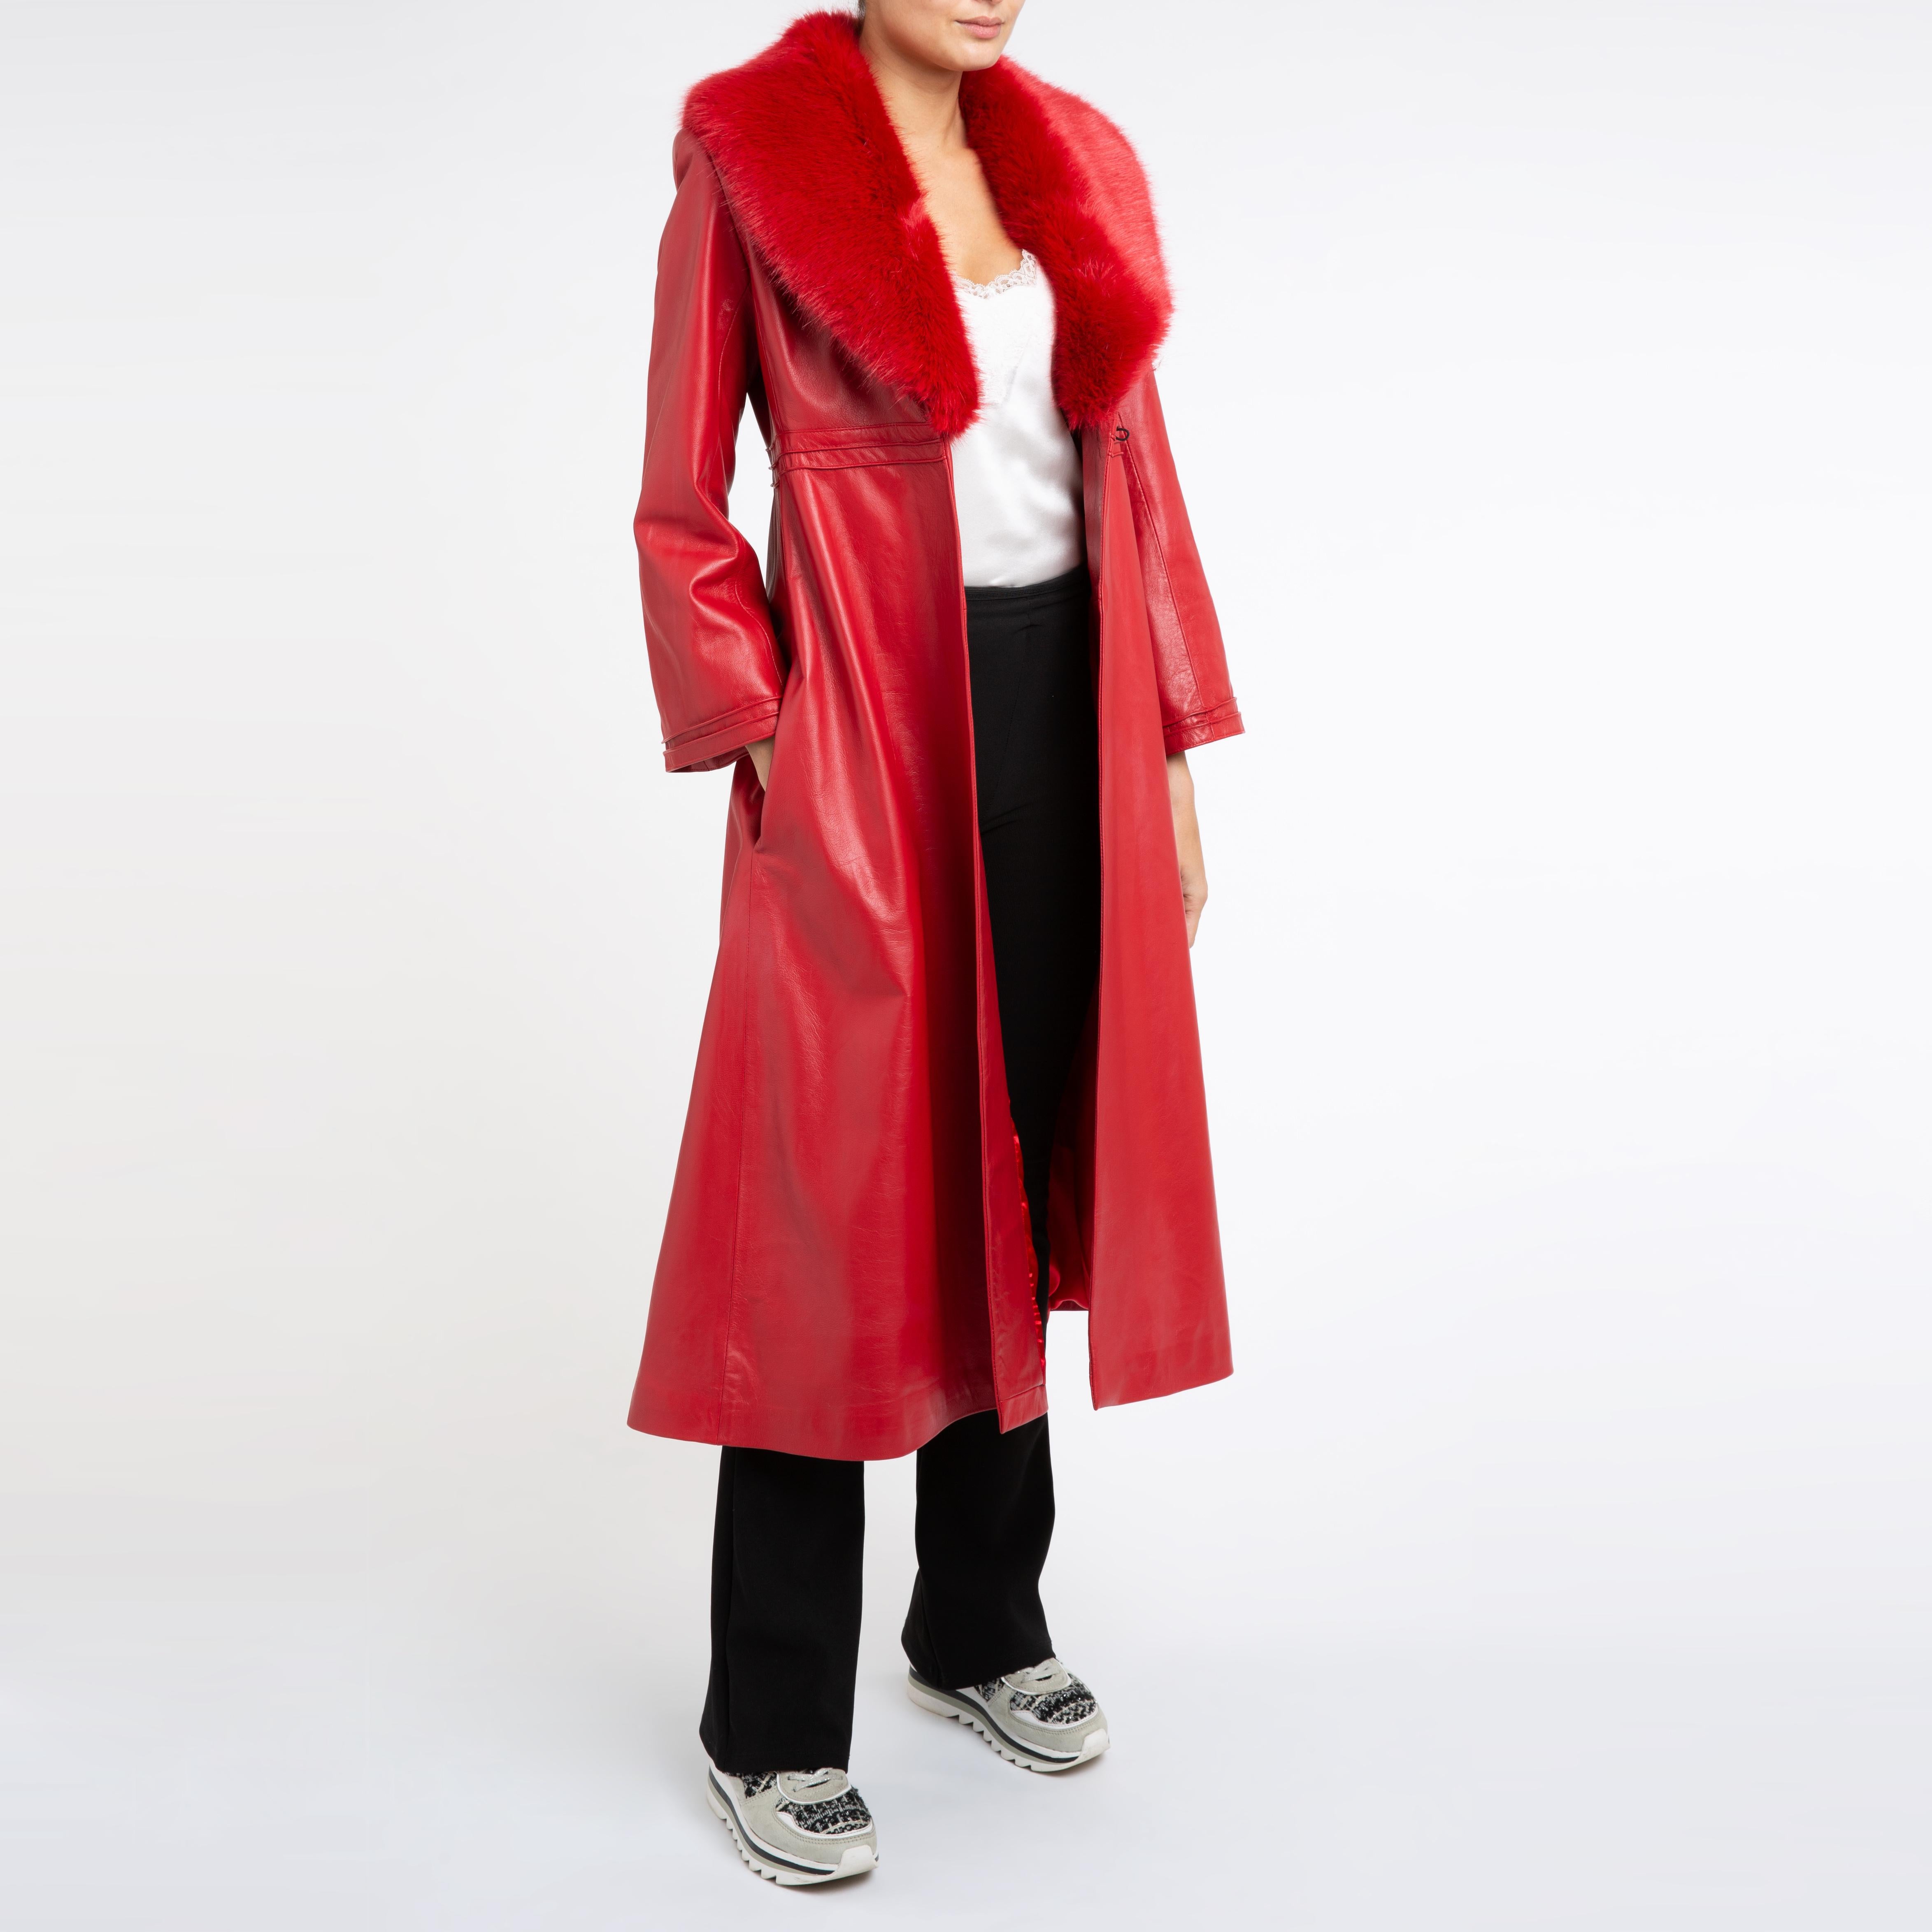 Verheyen London Edward Leather Coat with Faux Fur Collar in Red - Size uk 12 For Sale 7